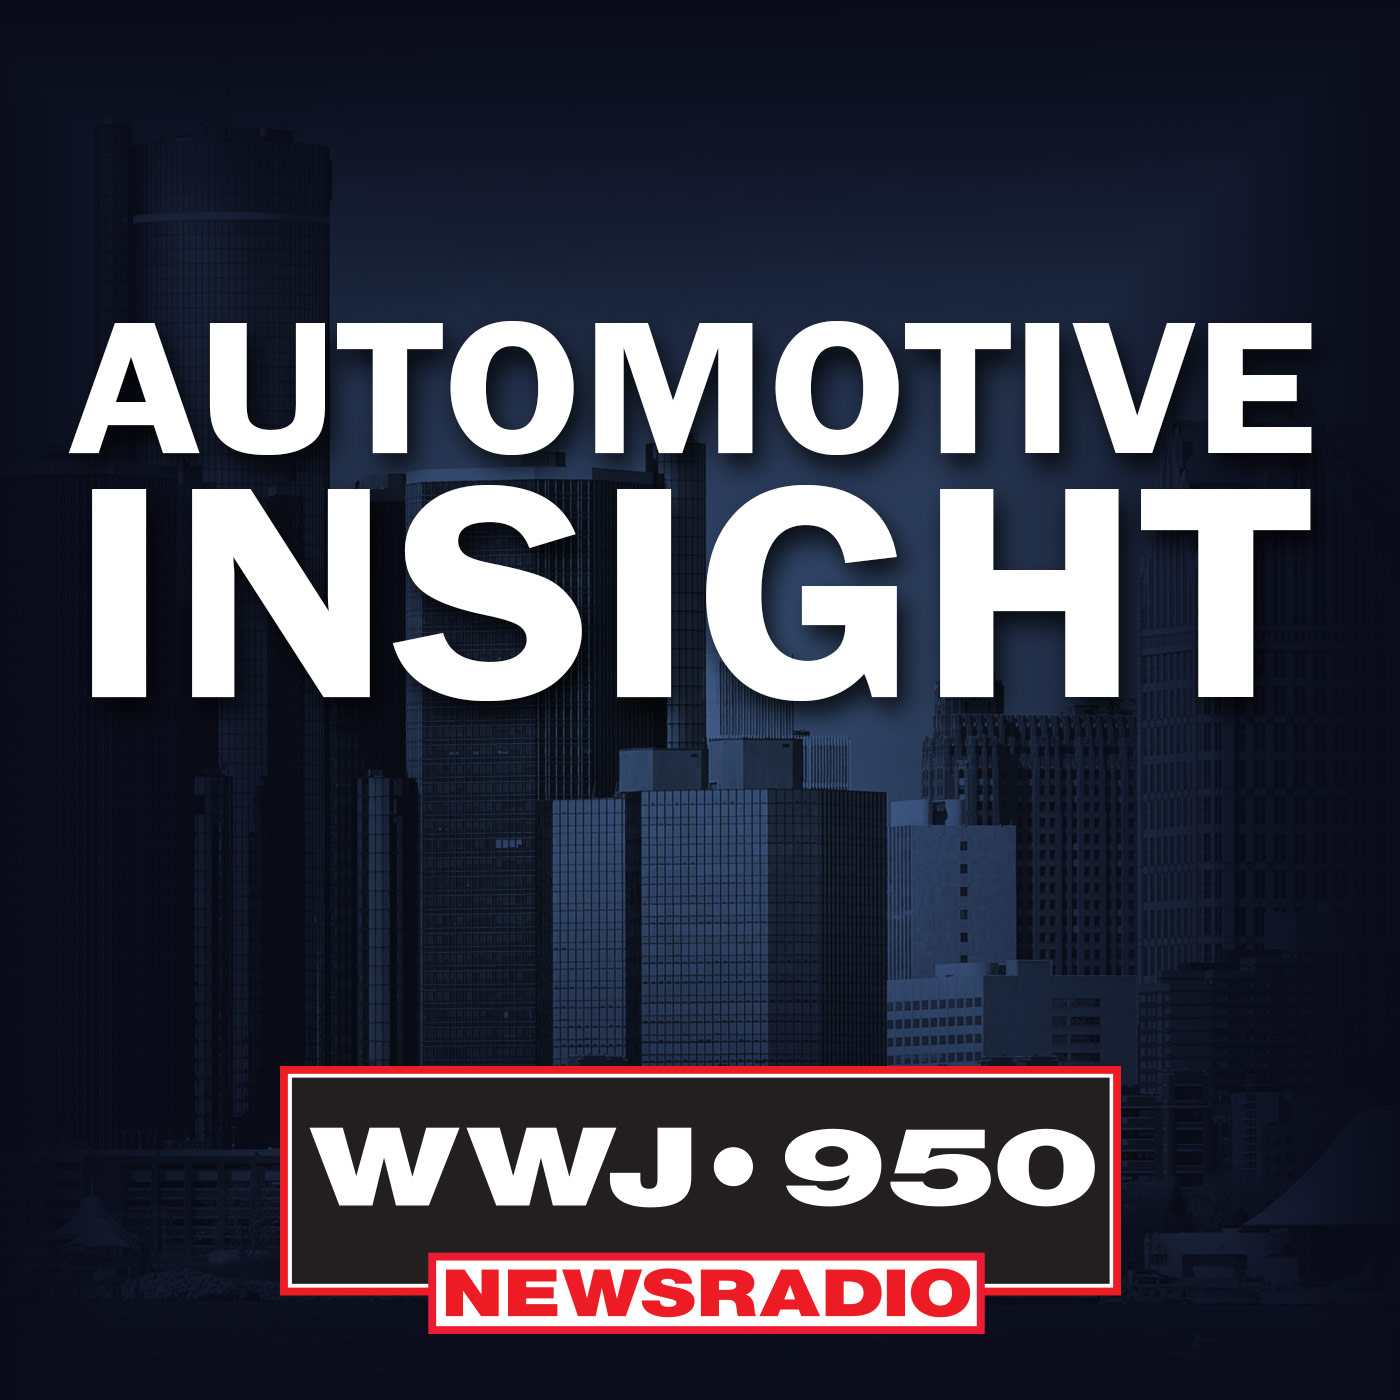 Automotive Insight - Just in time not going away